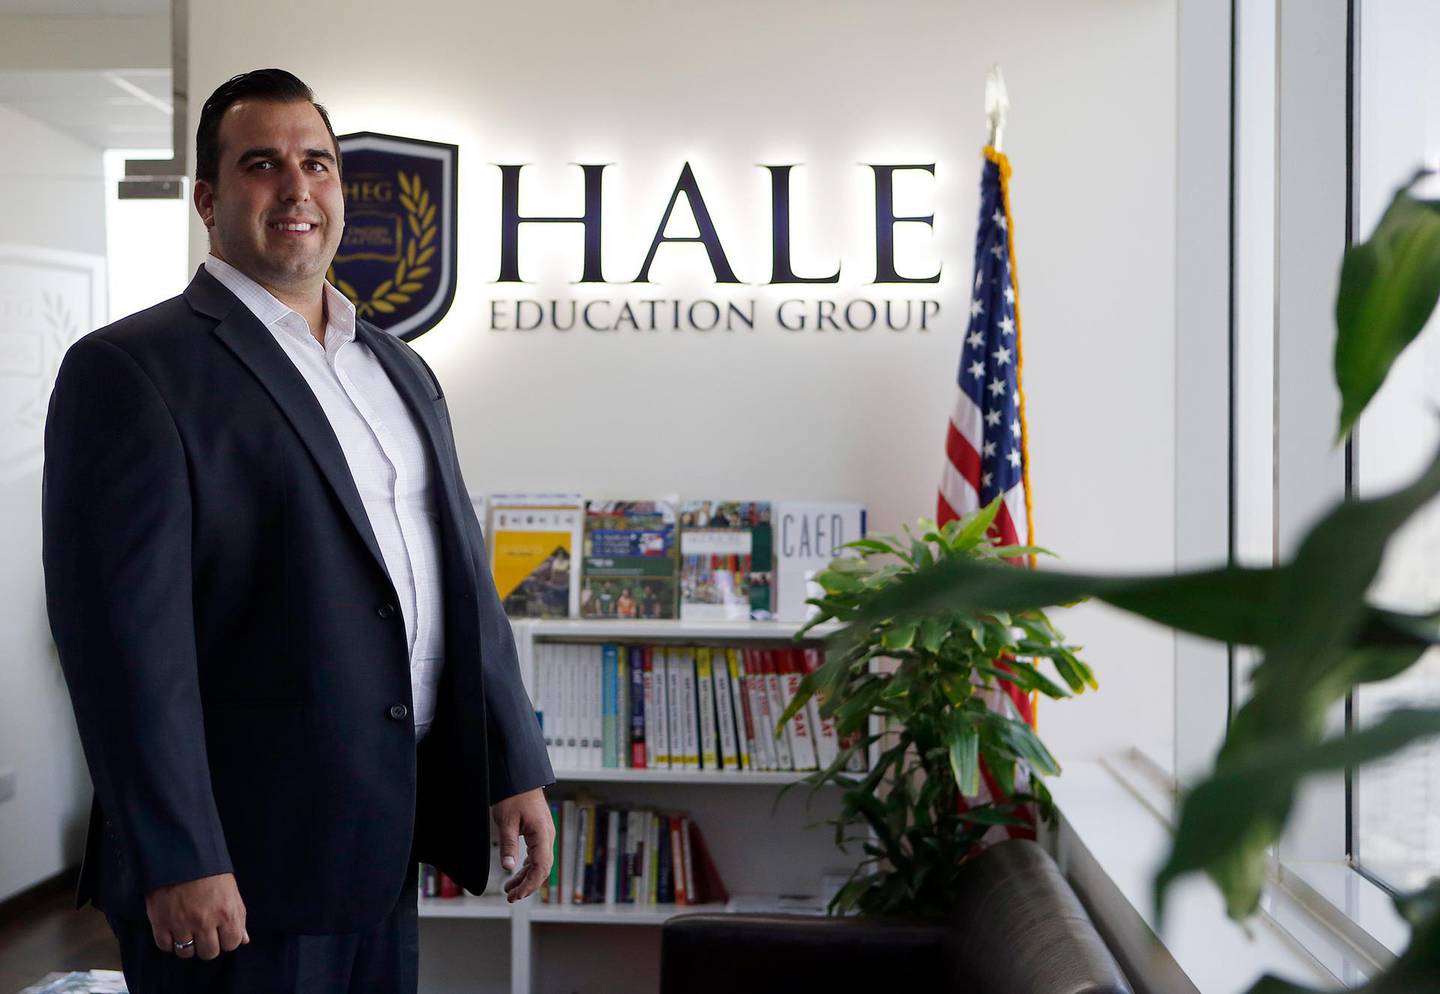 DUBAI - UNITED ARAB EMIRATES - 14MAY2017 - Peter Davos, founder of Hale Education Group in Dubai. Ravindranath K / The National ID: 35630 (to go with Suzanne Locke Story for Business) *** Local Caption ***  RK1405-DAVOS06.jpg